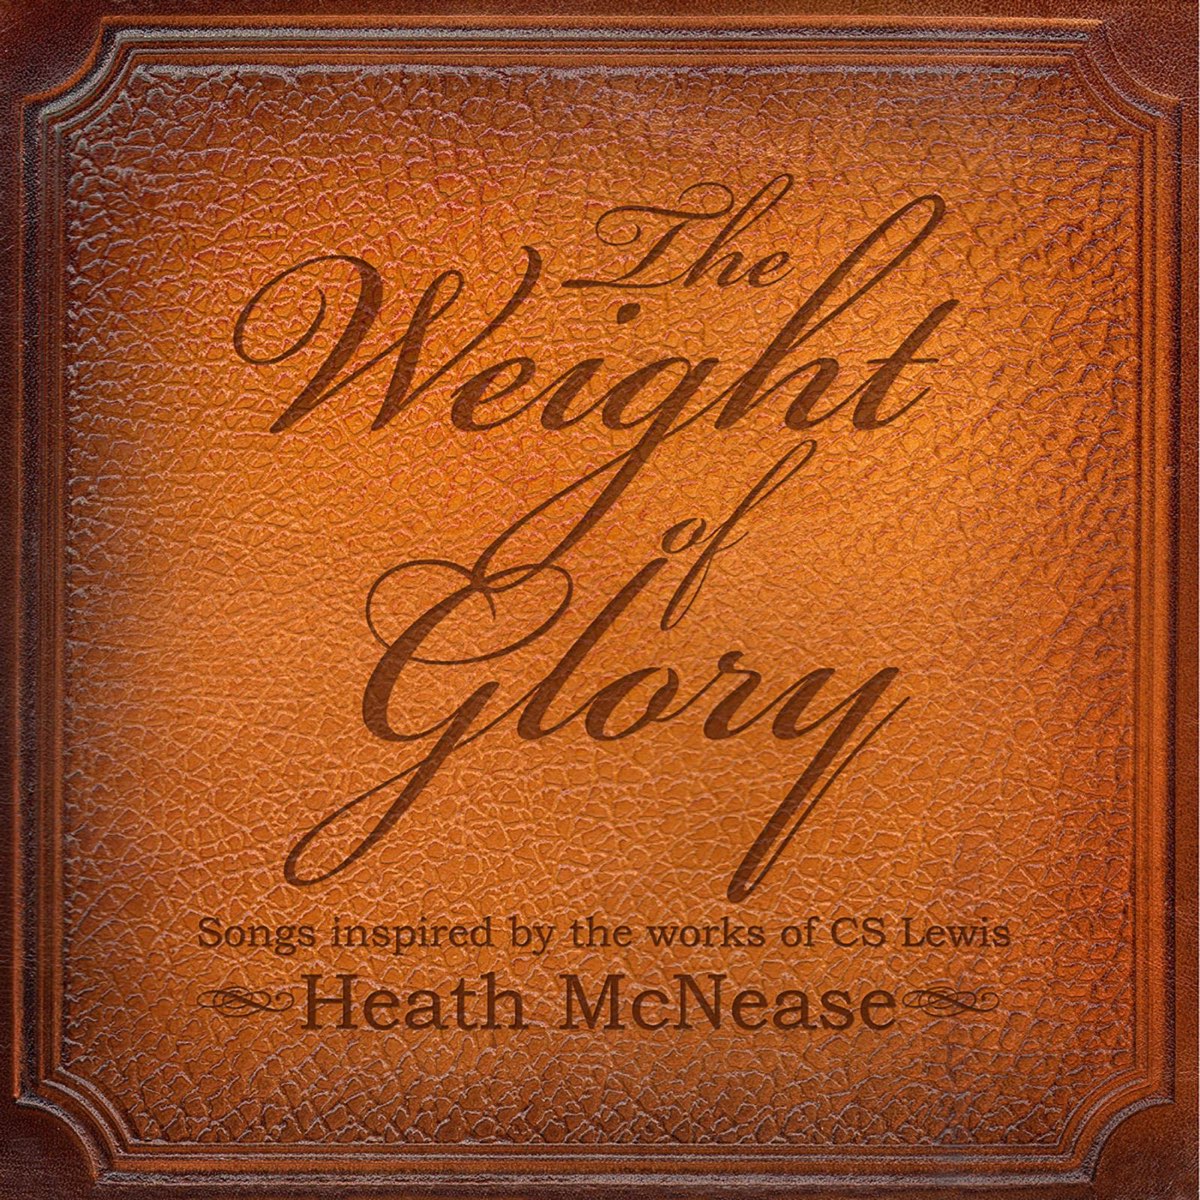 The Weight of Glory: Songs Inspired by the Works of C.S. Lewis của Heath  McNease trên Apple Music